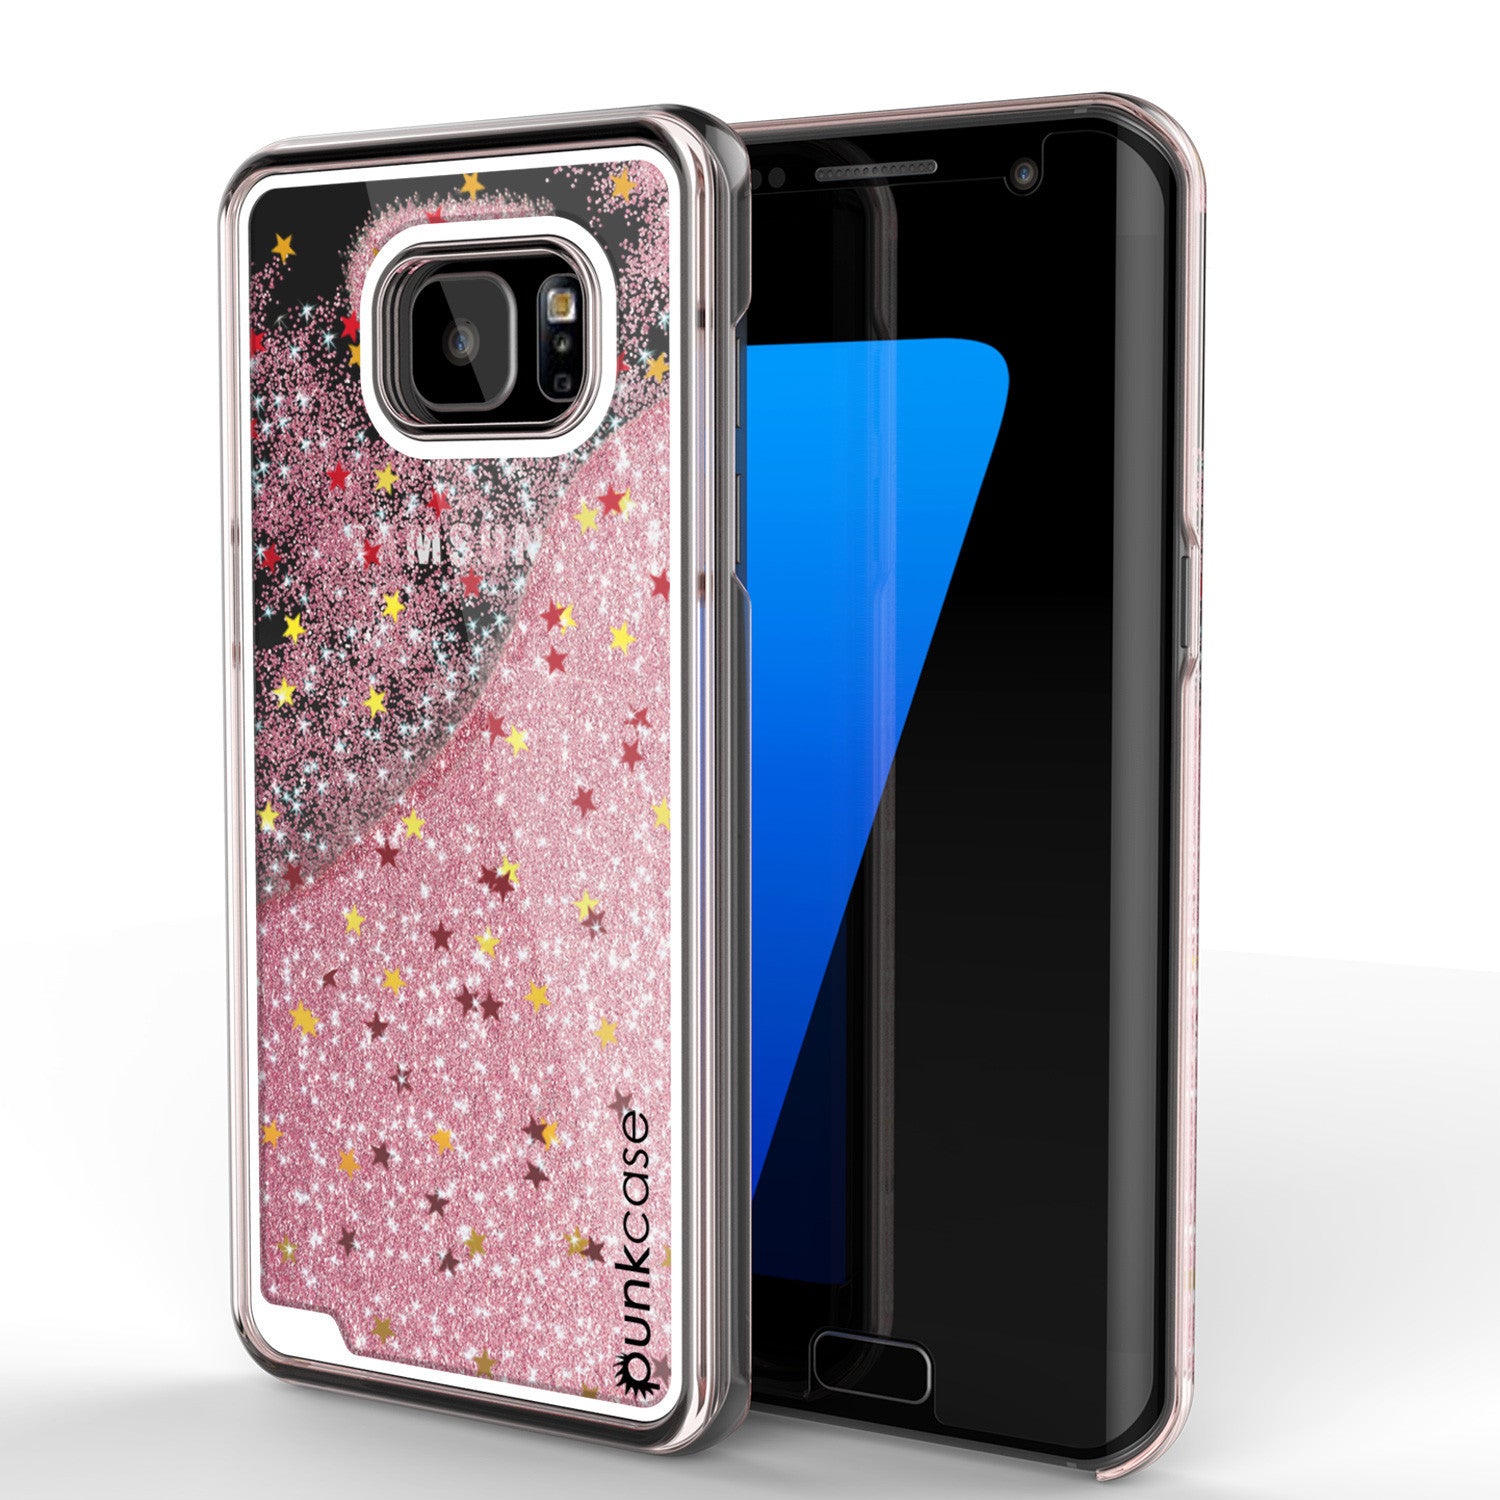 Samsung Galaxy S7 Edge Case, Punkcase [Liquid Rose Series] Protective Dual Layer Floating Glitter Cover + PunkShield Screen Protector